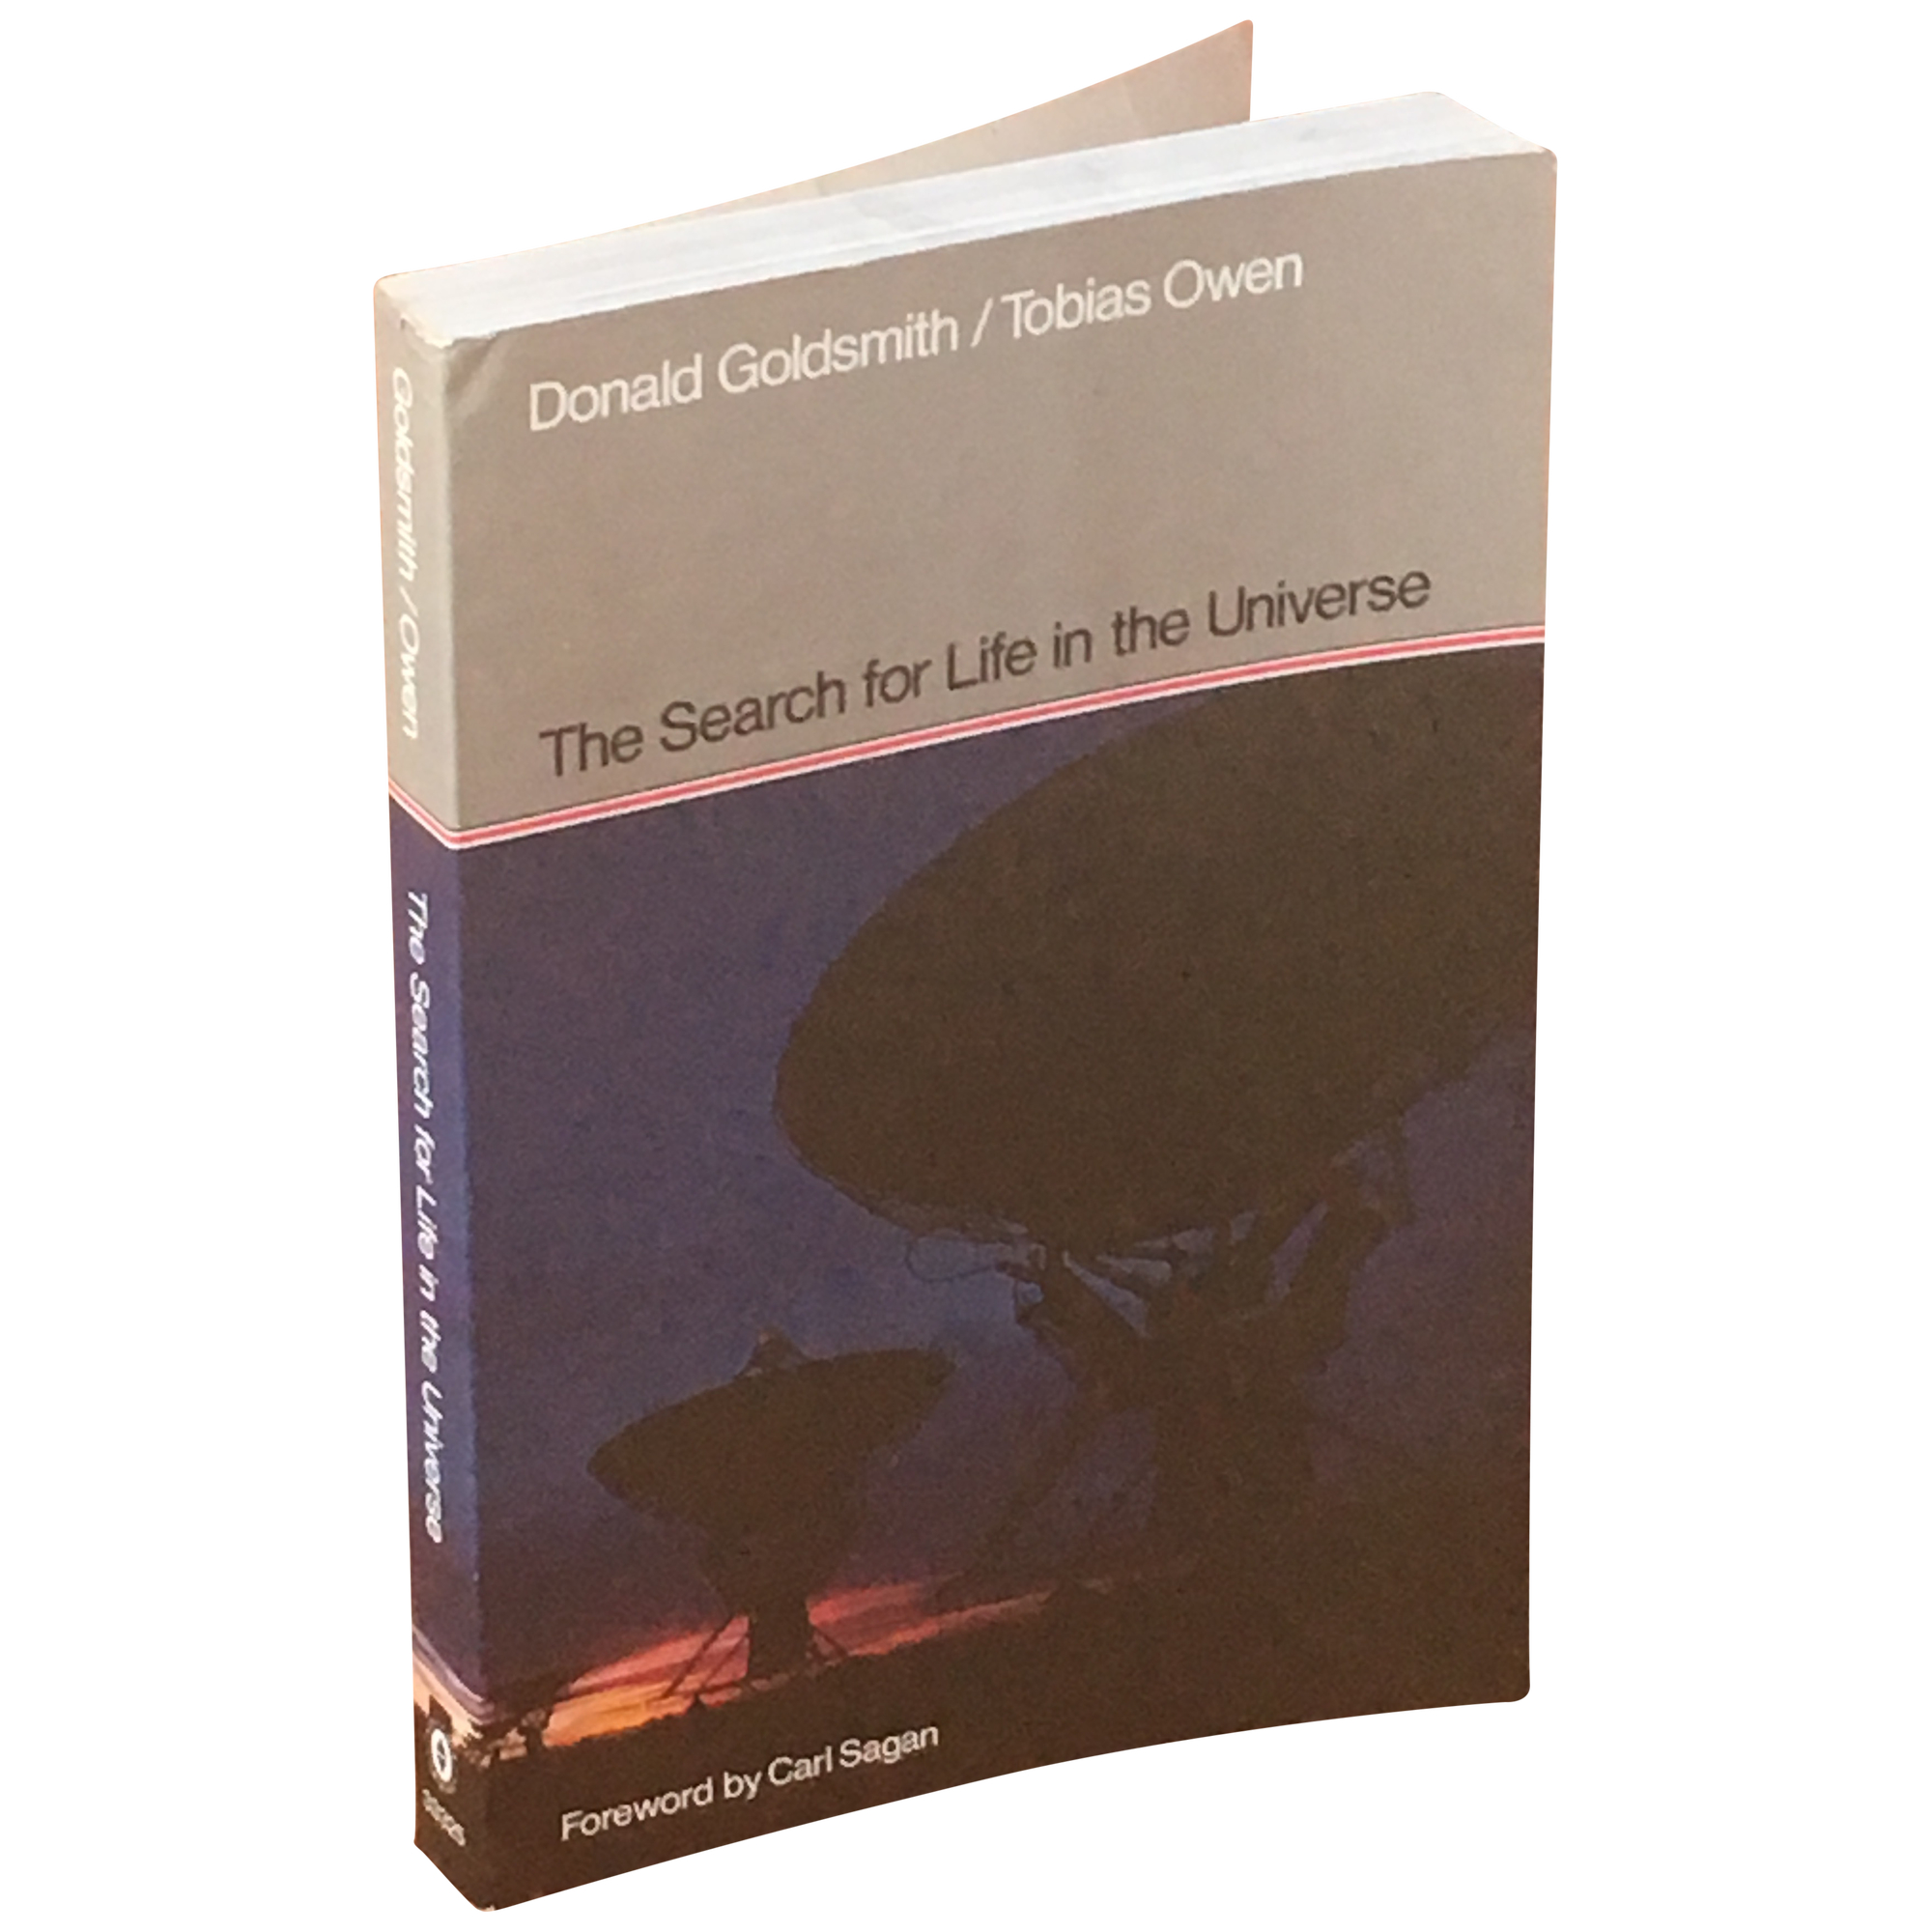 The Search for Life in the Universe [Inscribed] - Goldsmith, Donald and Tobias Owen